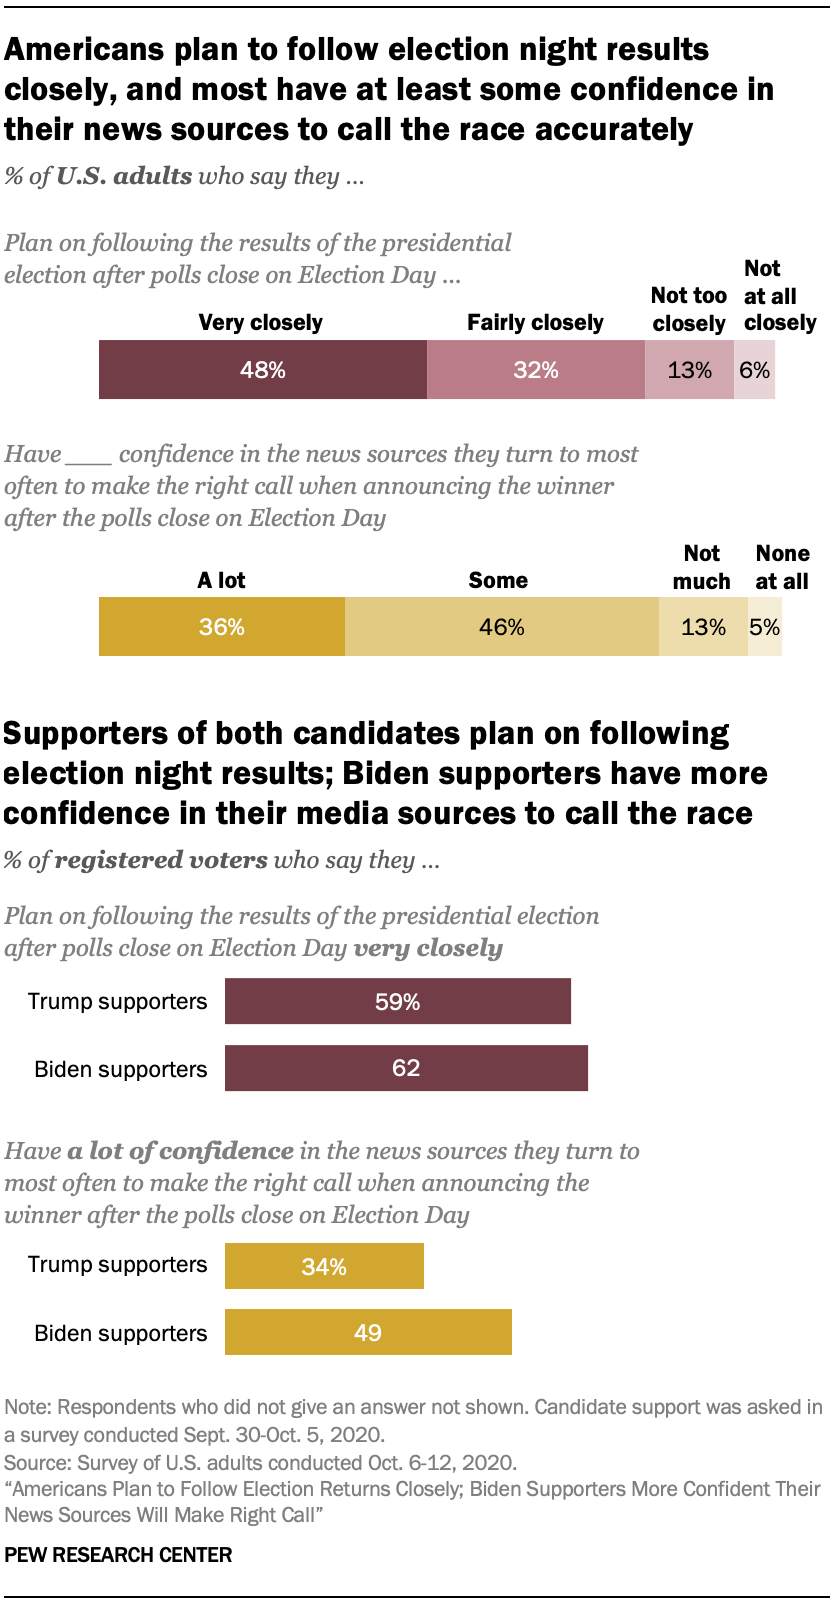 Americans plan to follow election night results closely, and most have at least some confidence in their news sources to call the race accurately